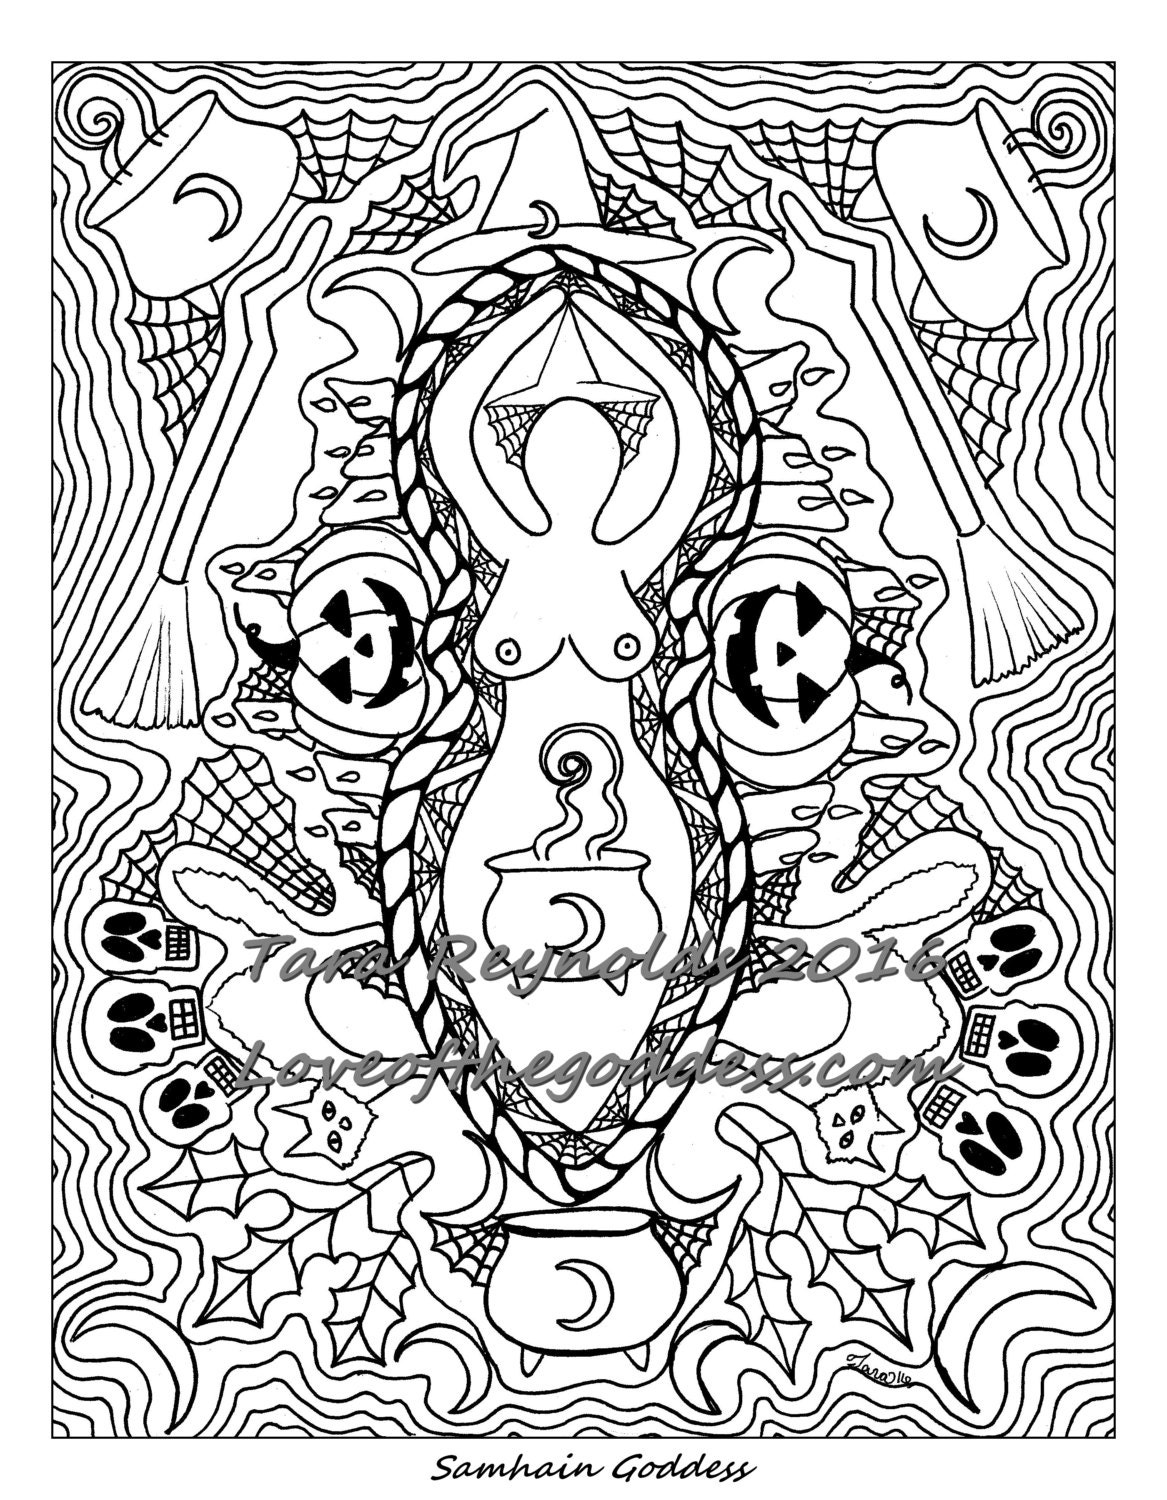 coloring page for adults samhain goddess coloring